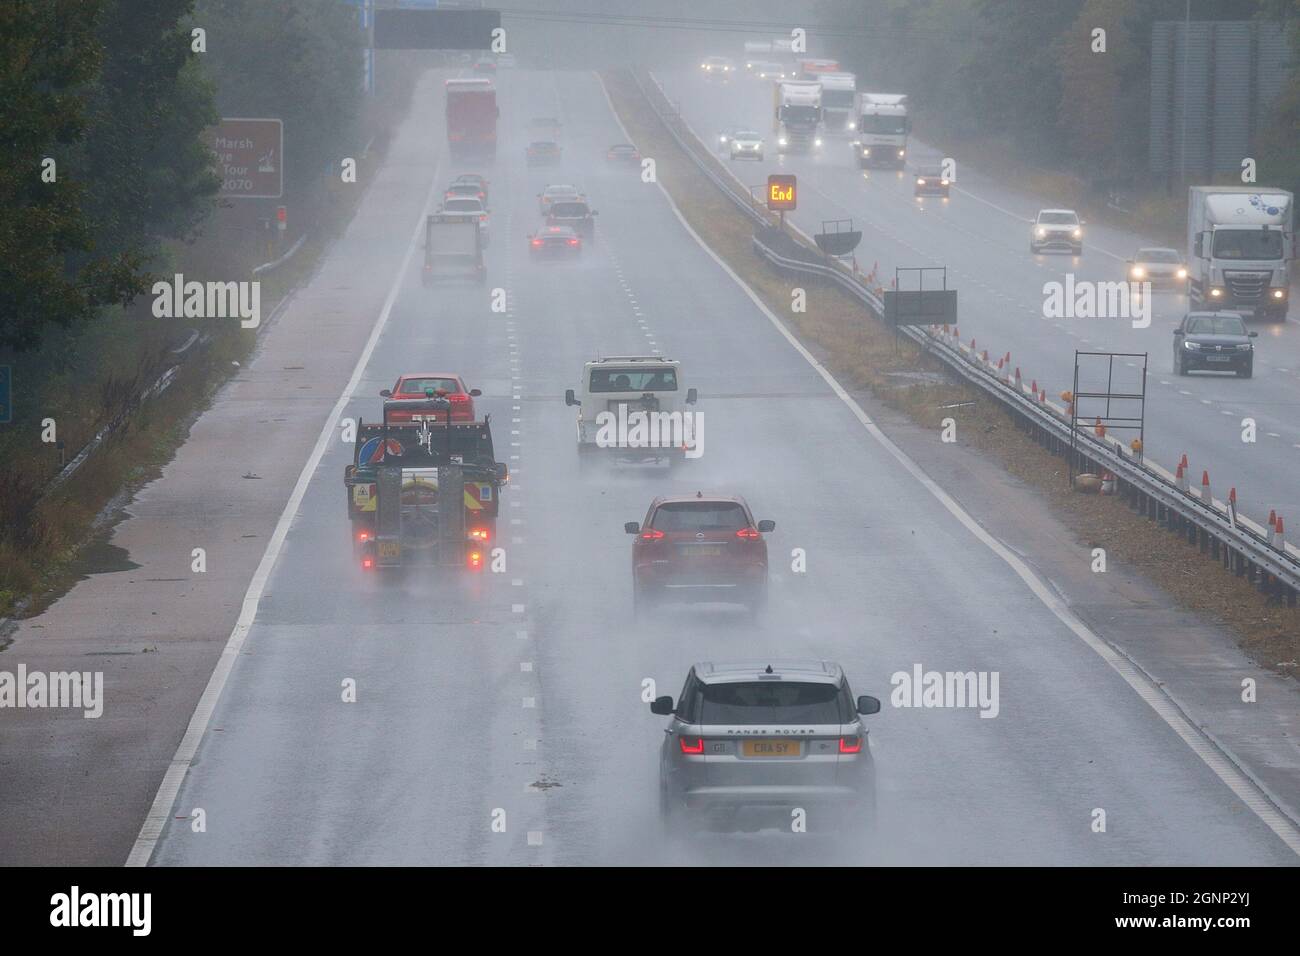 Ashford, Kent, UK. 27 Sep, 2021. UK Weather: A band of heavy rain sweeps across the country with windy weather seen here on the M20 motorway heading South towards Dover. Photo Credit: Paul Lawrenson /Alamy Live News Stock Photo